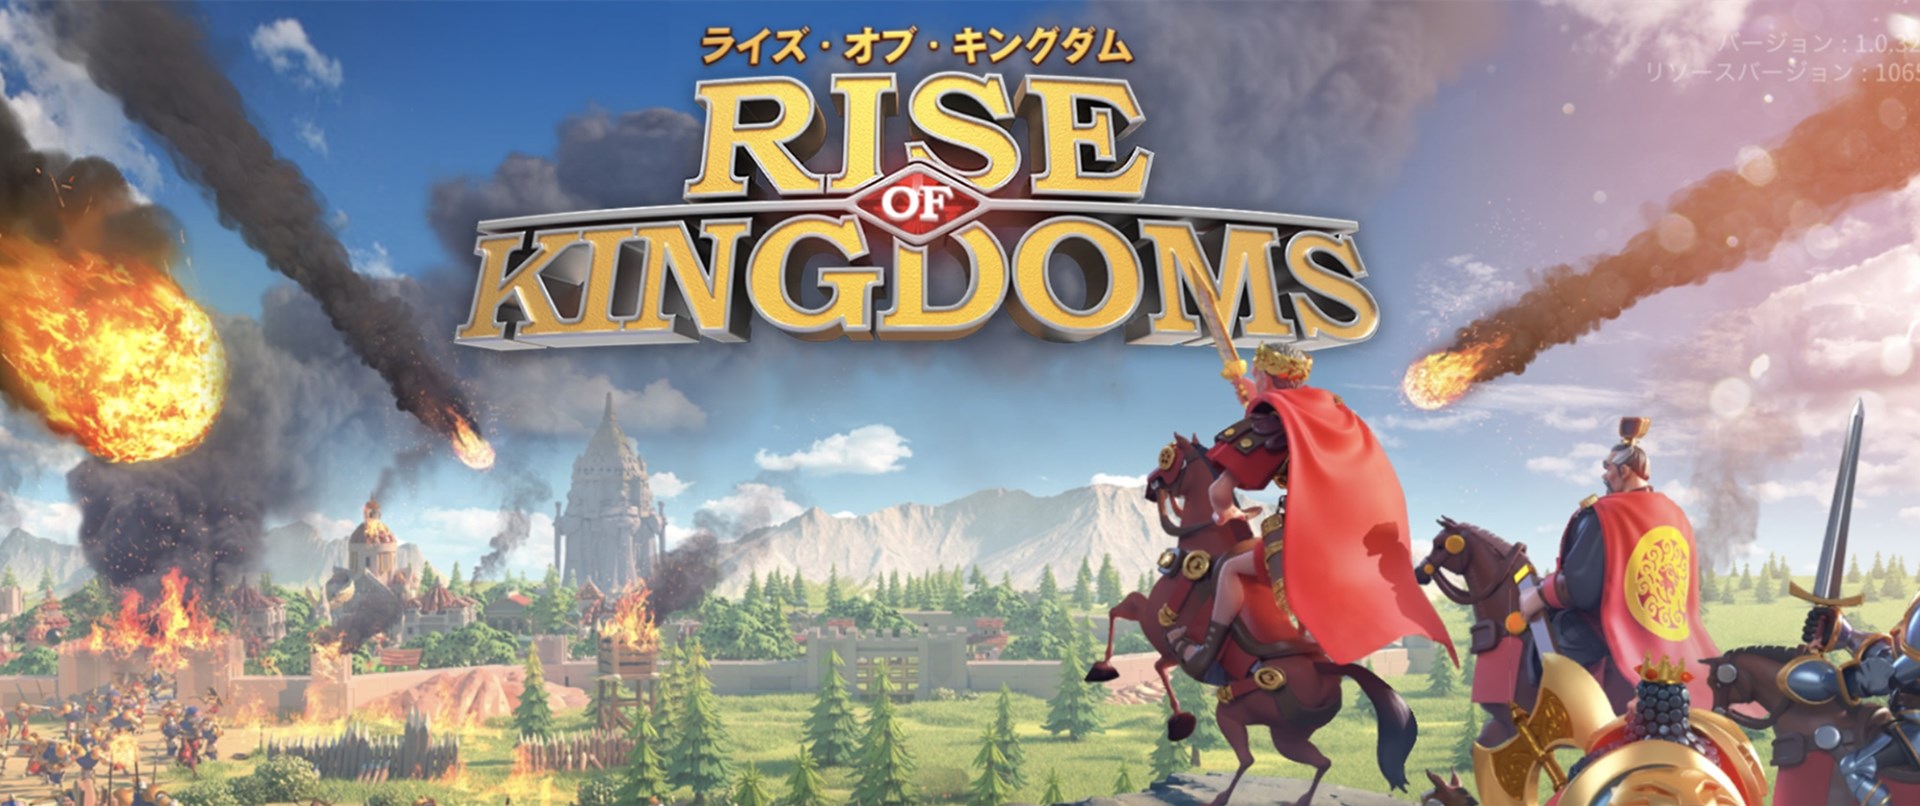 is rise of kingdoms good